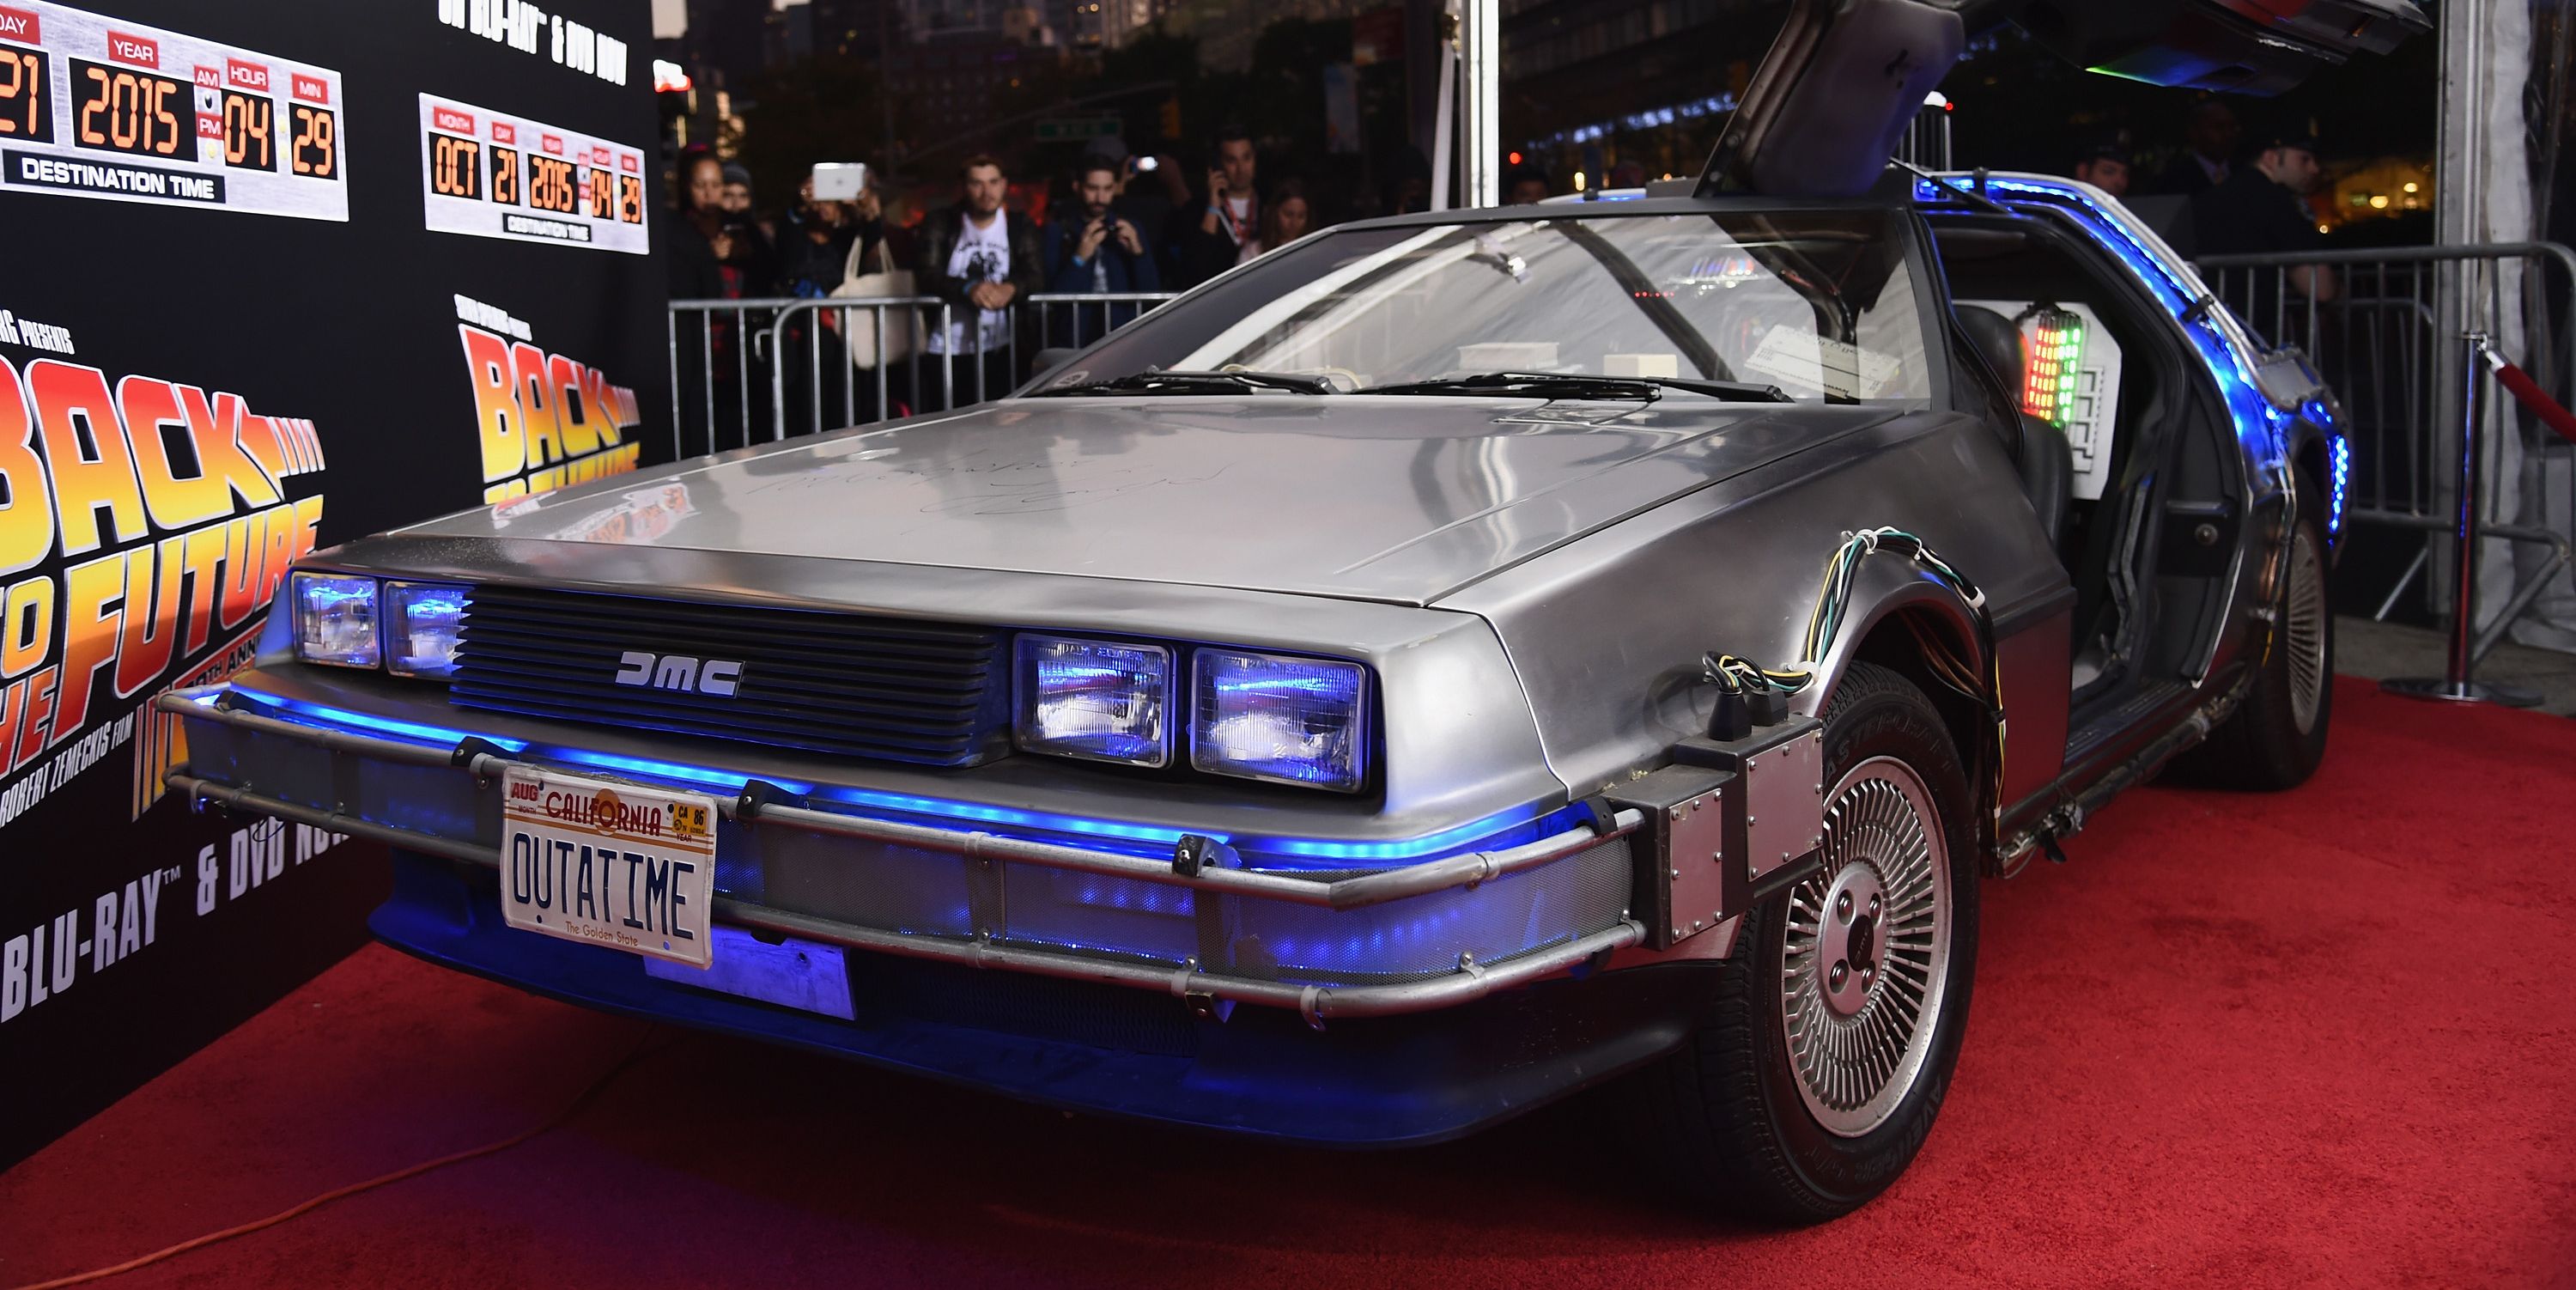 The DeLorean Is at the Center of a New Lawsuit